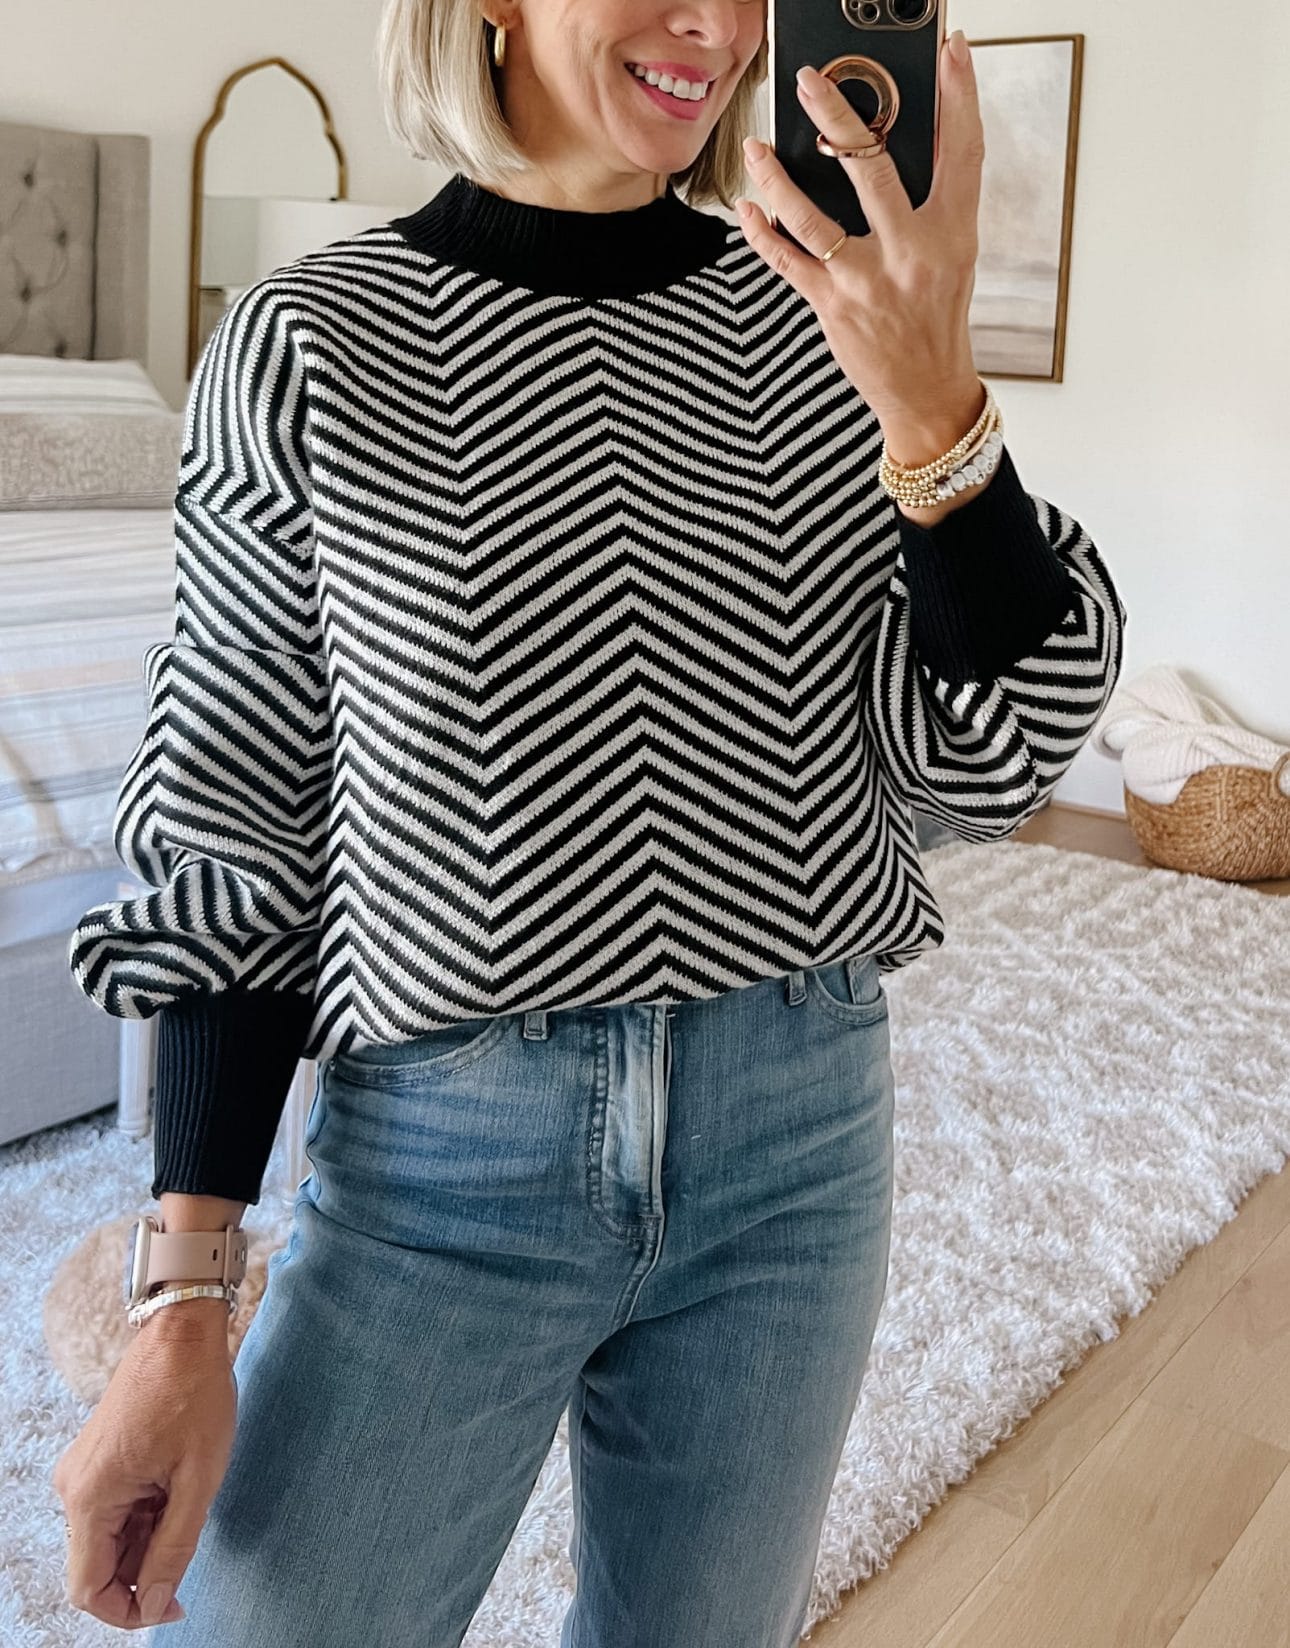 Jeans, Booties, Chevron Striped Black and White Sweater 